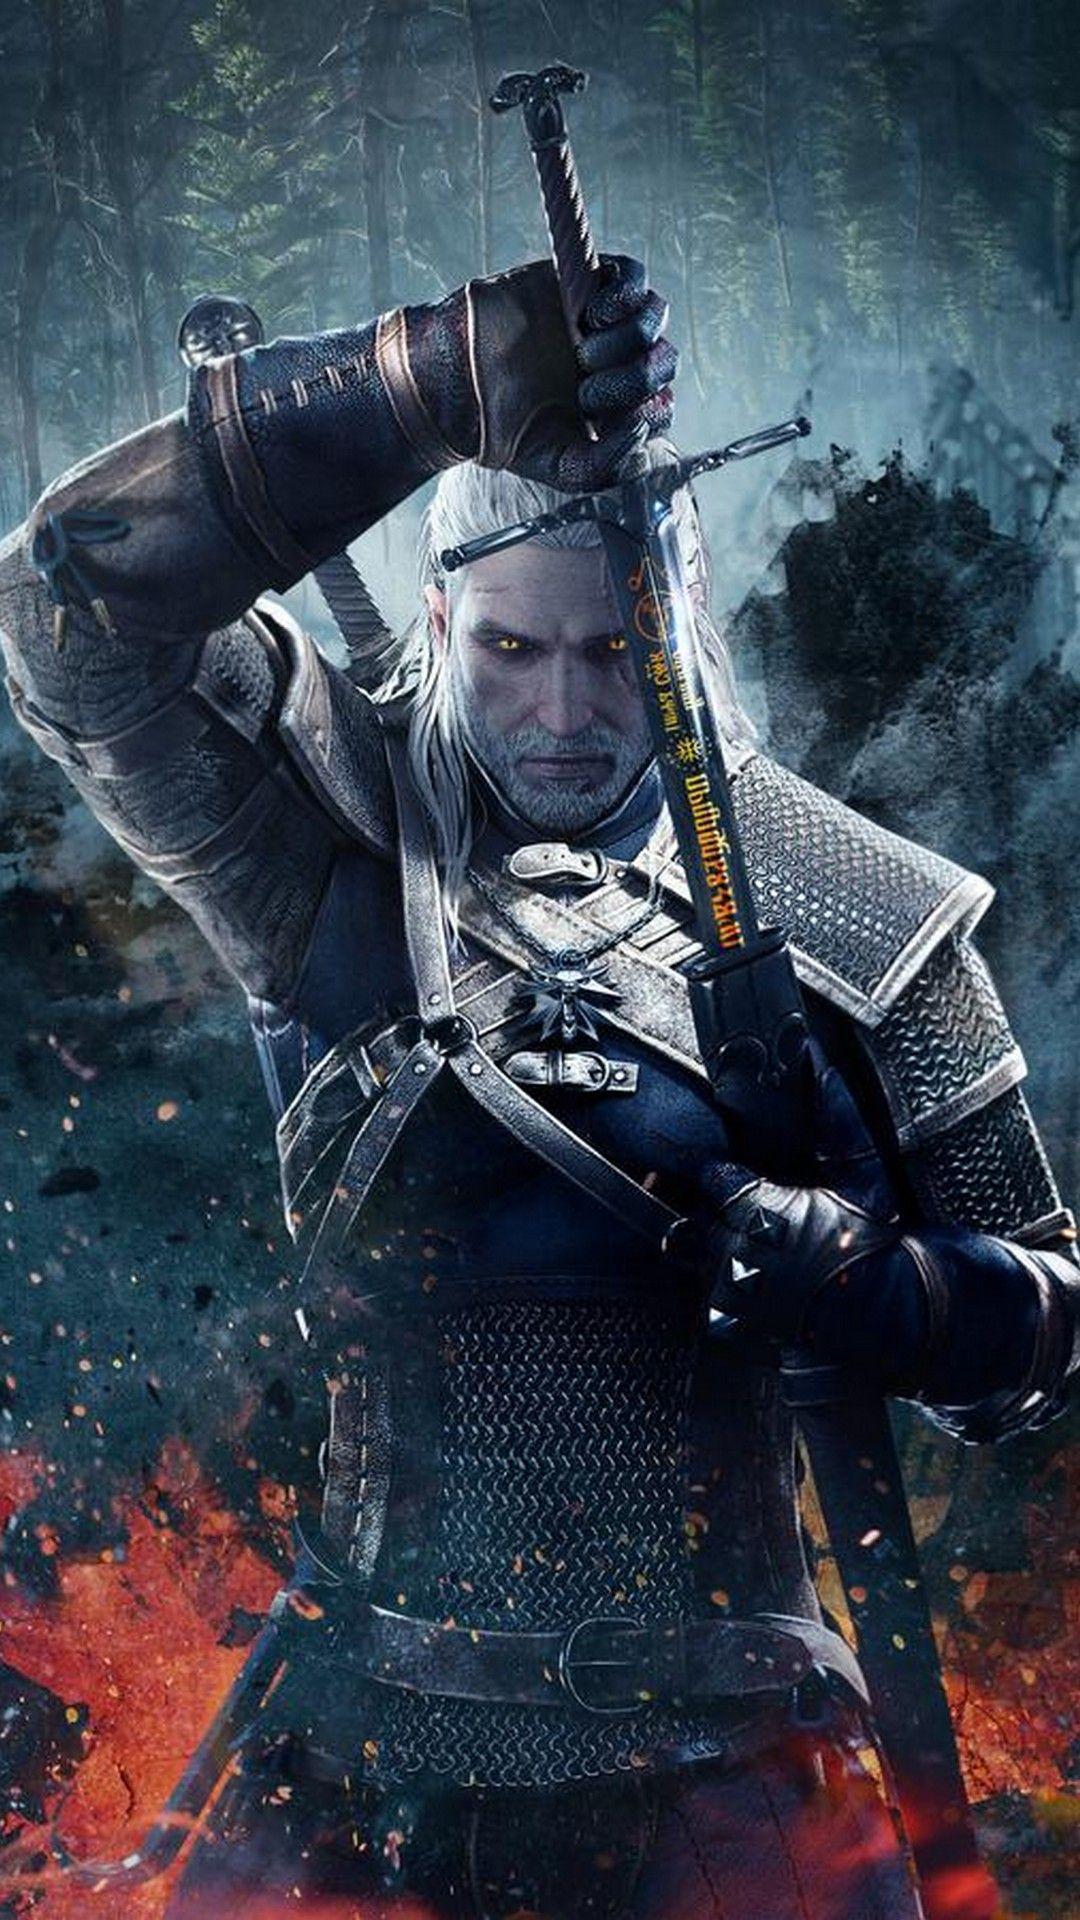 1080 x 1920 · jpeg - The Witcher Movie Wallpapers - Wallpaper Cave